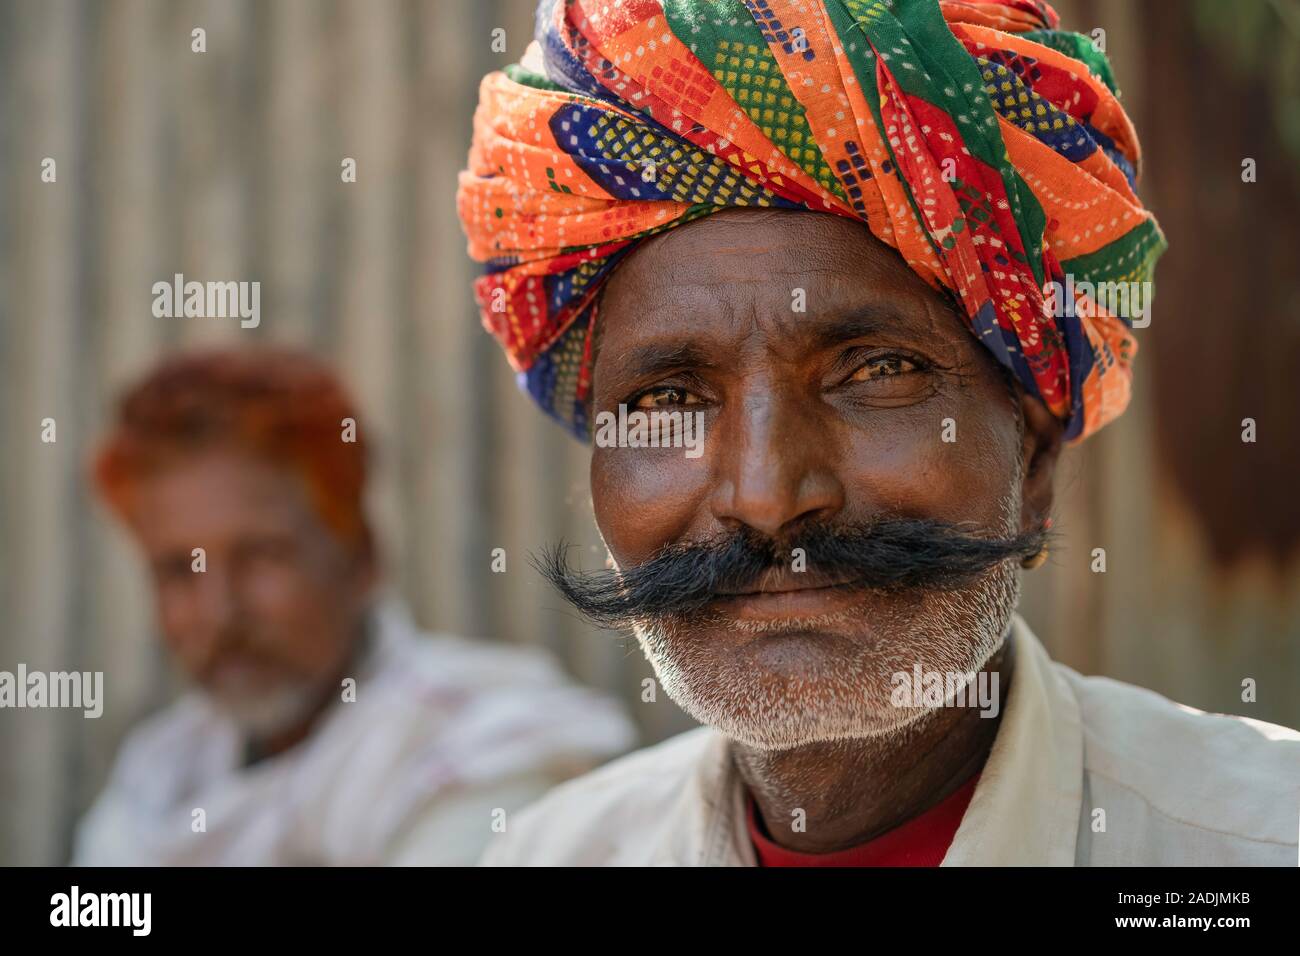 Traditional Rajput musician sporting moustache, stubble, and colorful turban on summer day on October 31, 2019 in Pushkar, Rajasthan, India. Stock Photo